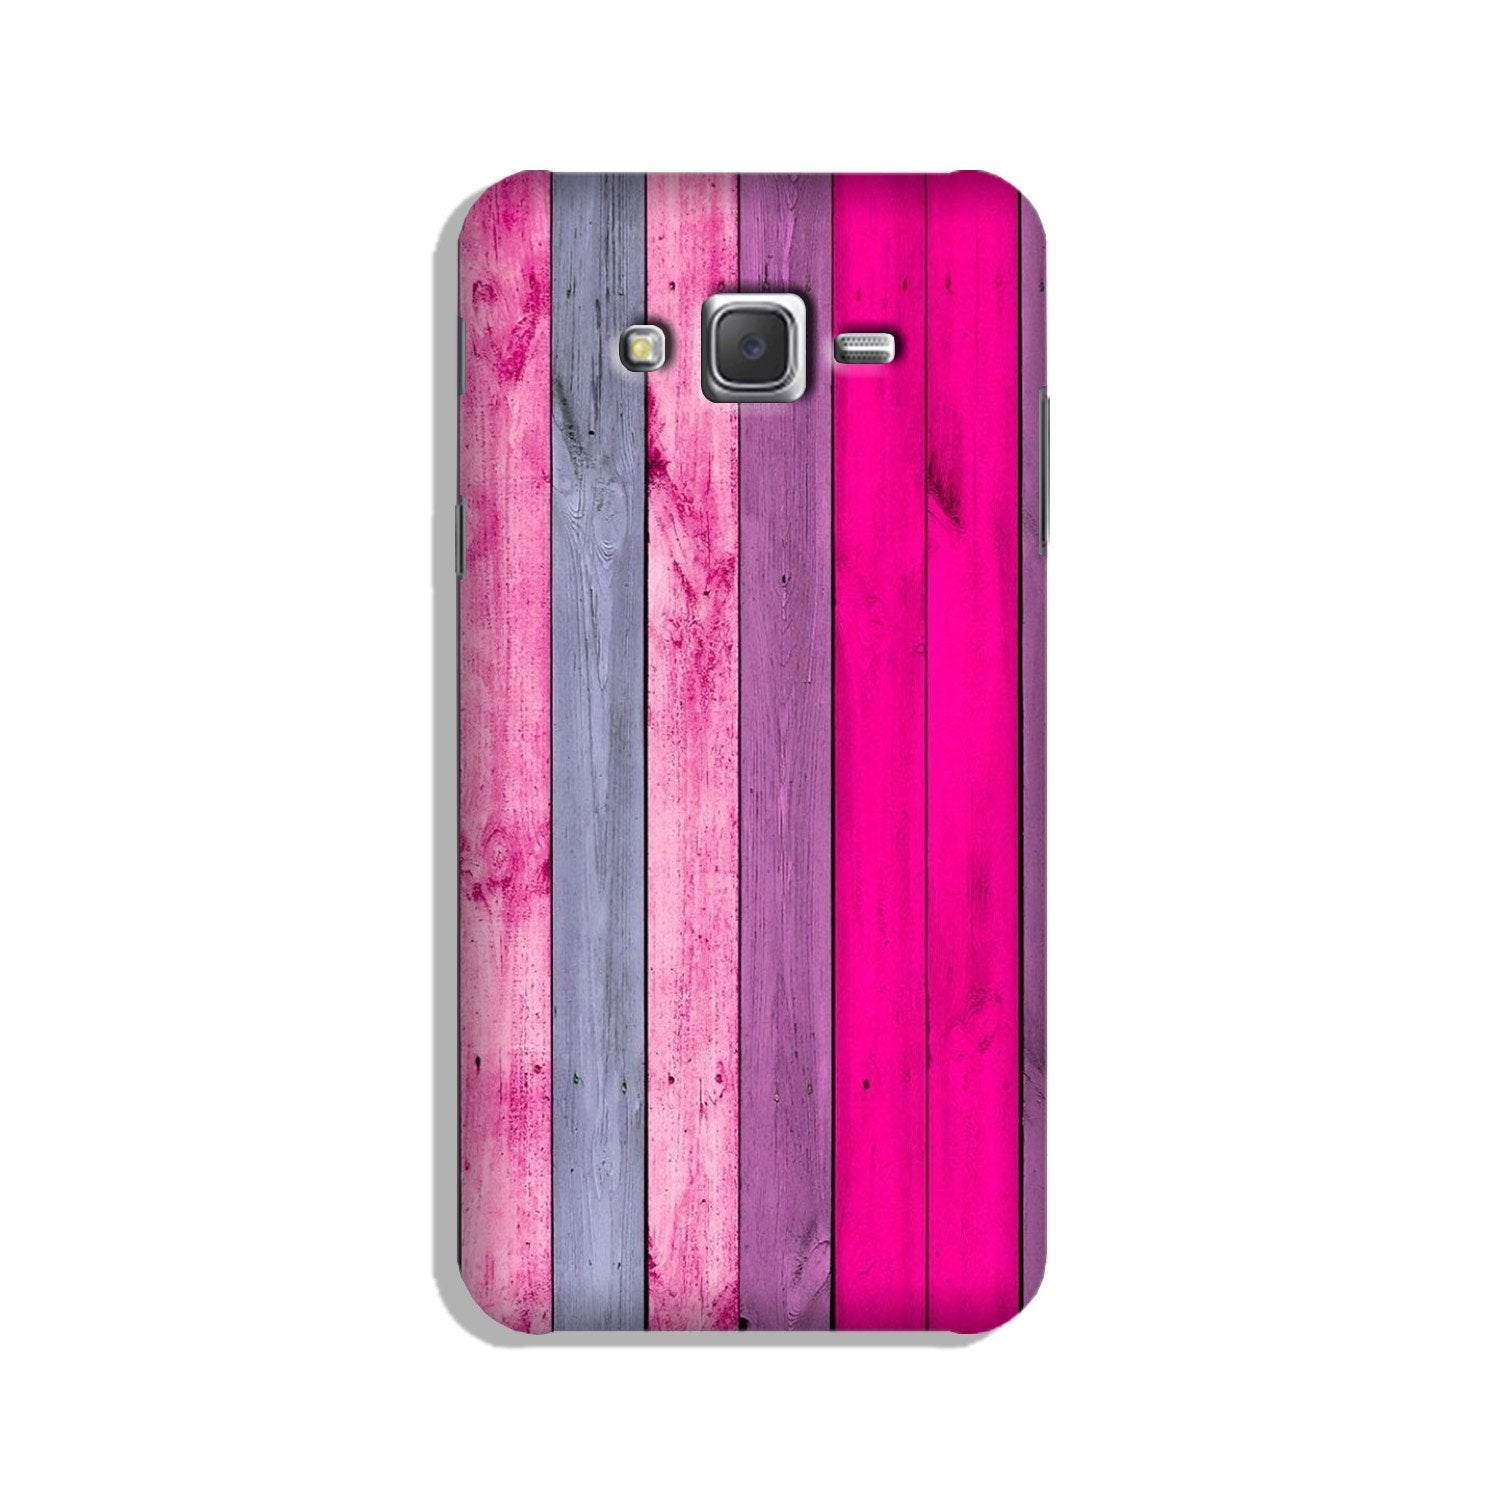 Wooden look Case for Galaxy J2 (2015)